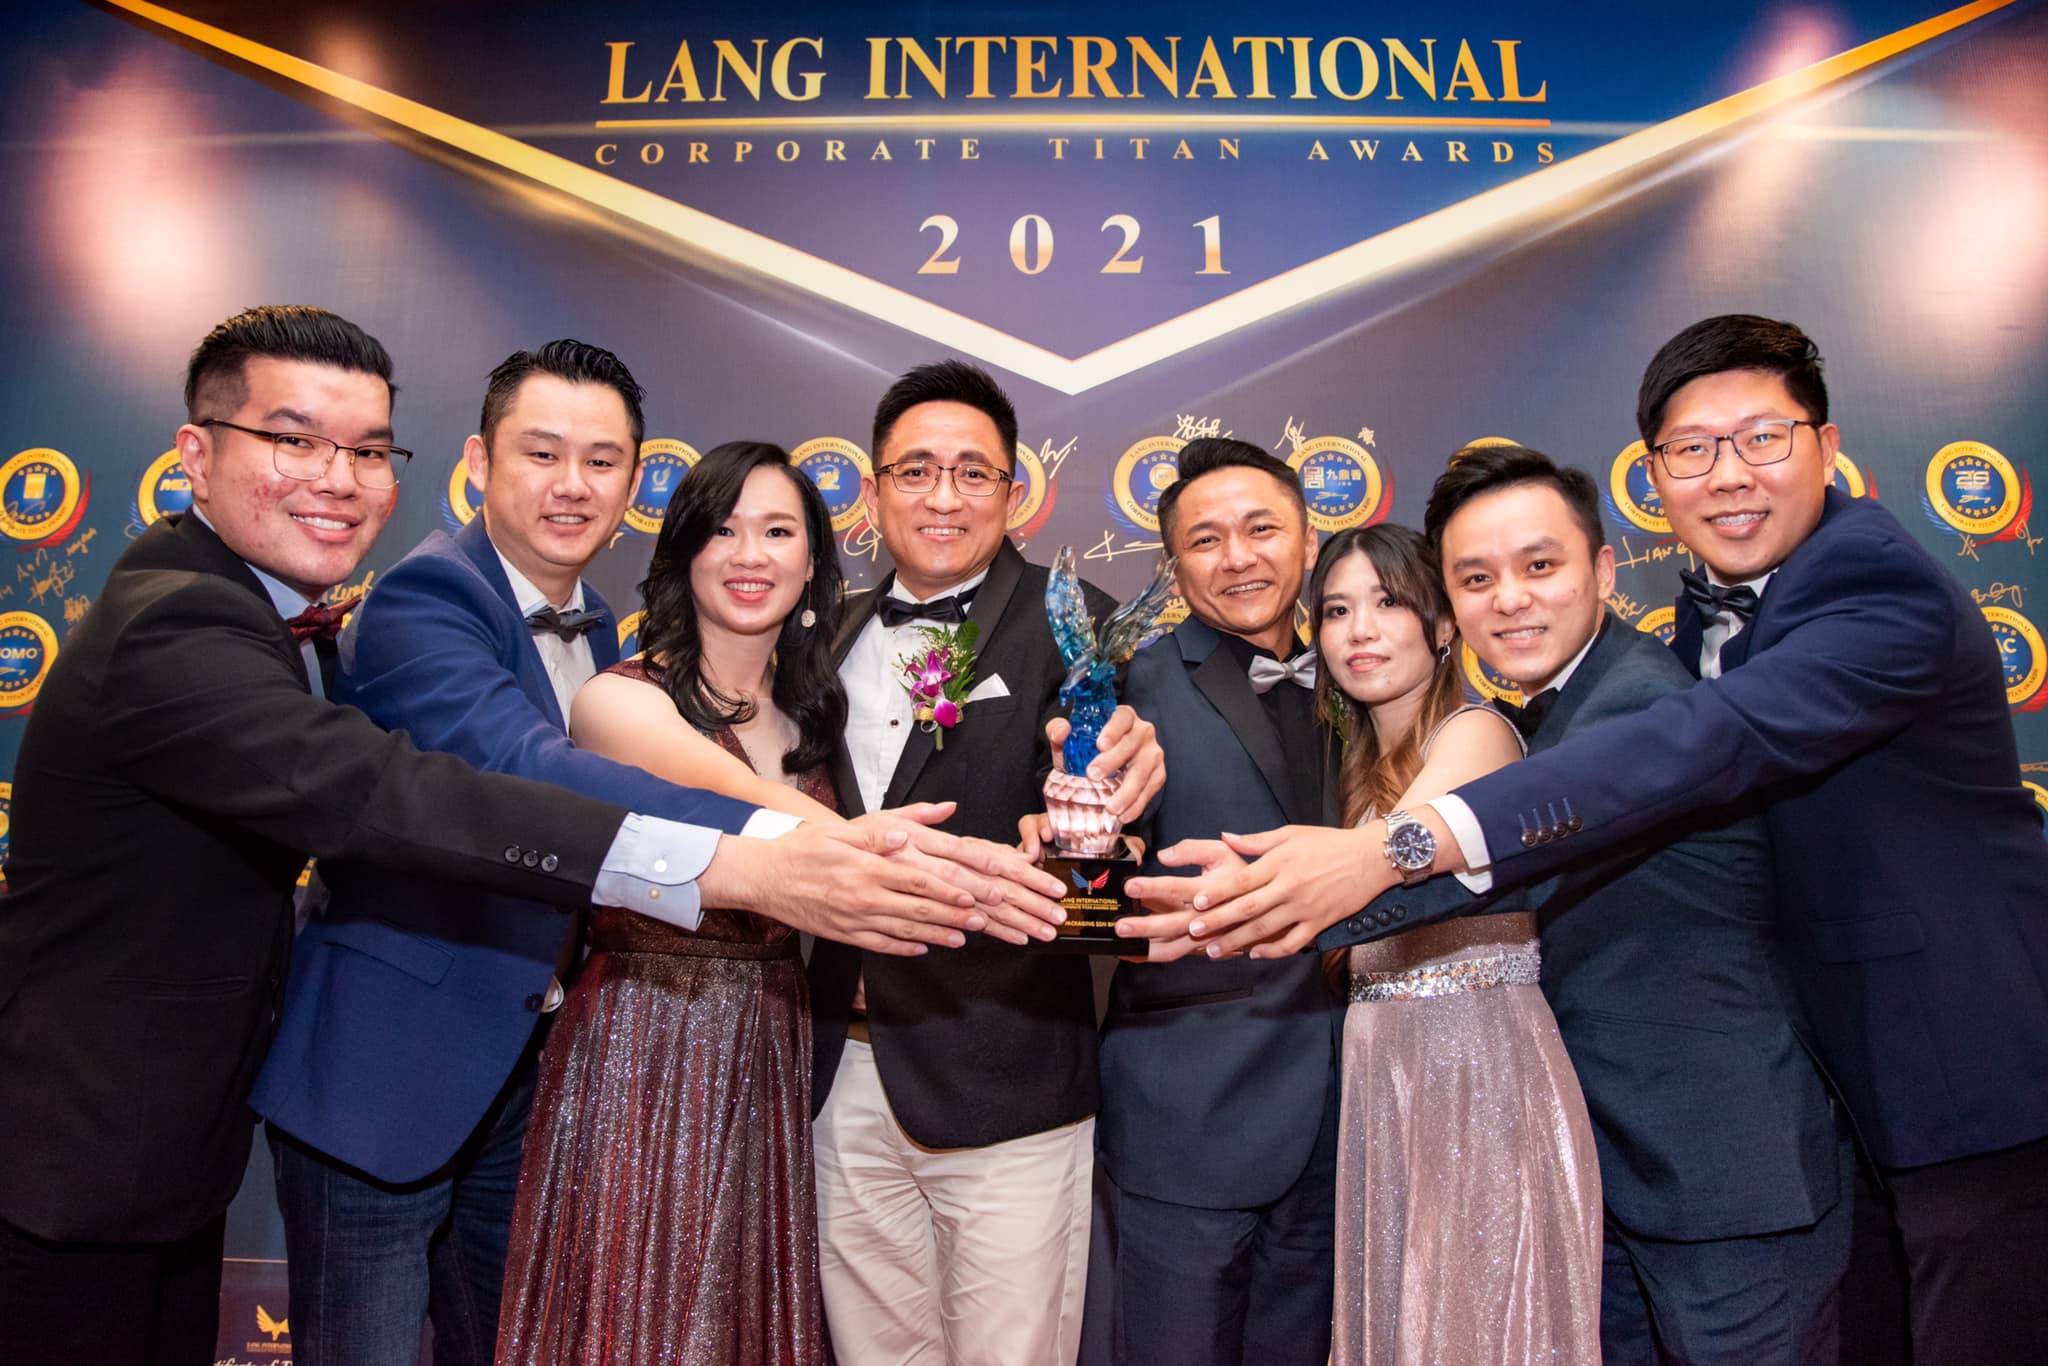 Lang International Corporate Titan Awards 2021 - Excellent Industrial Tapes Supplier